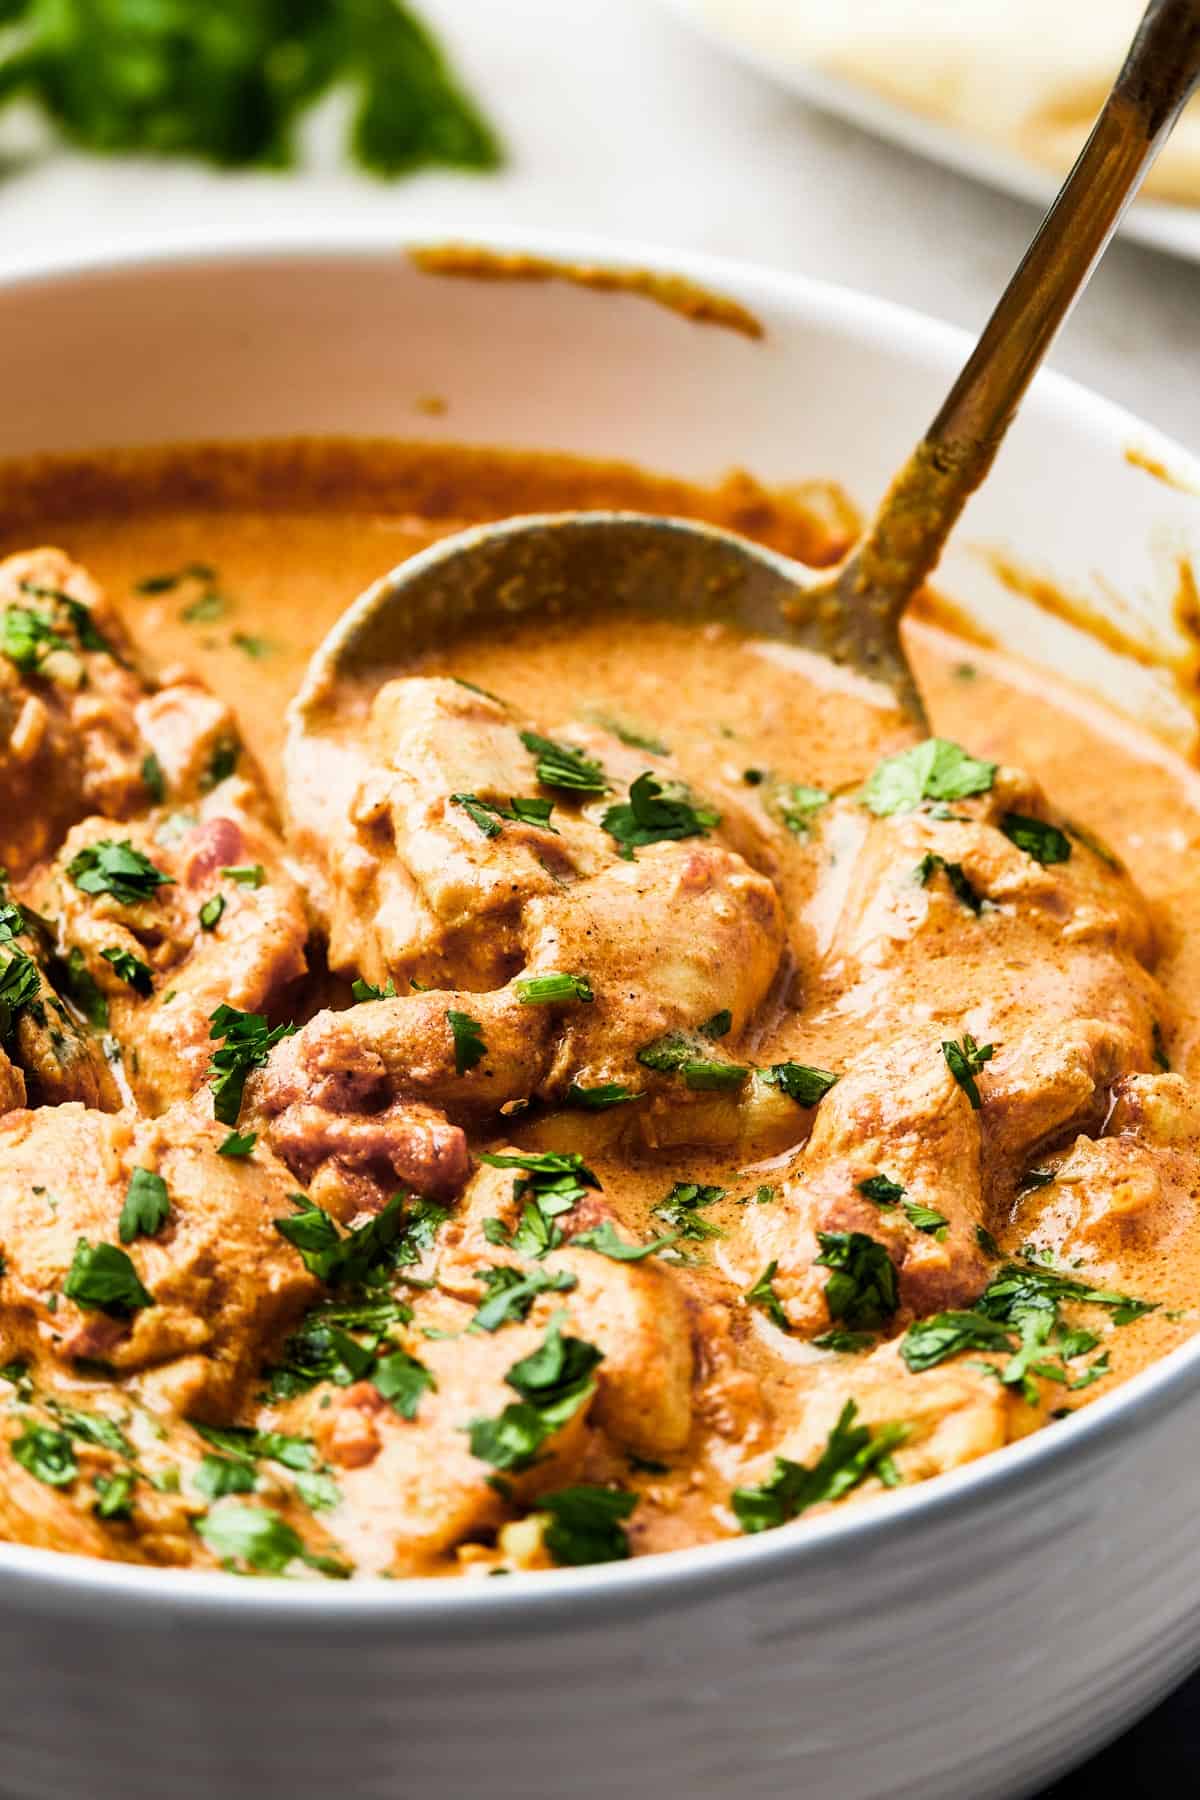 Close-up shot of Indian butter chicken in a white dish, showing the texture of the chicken.